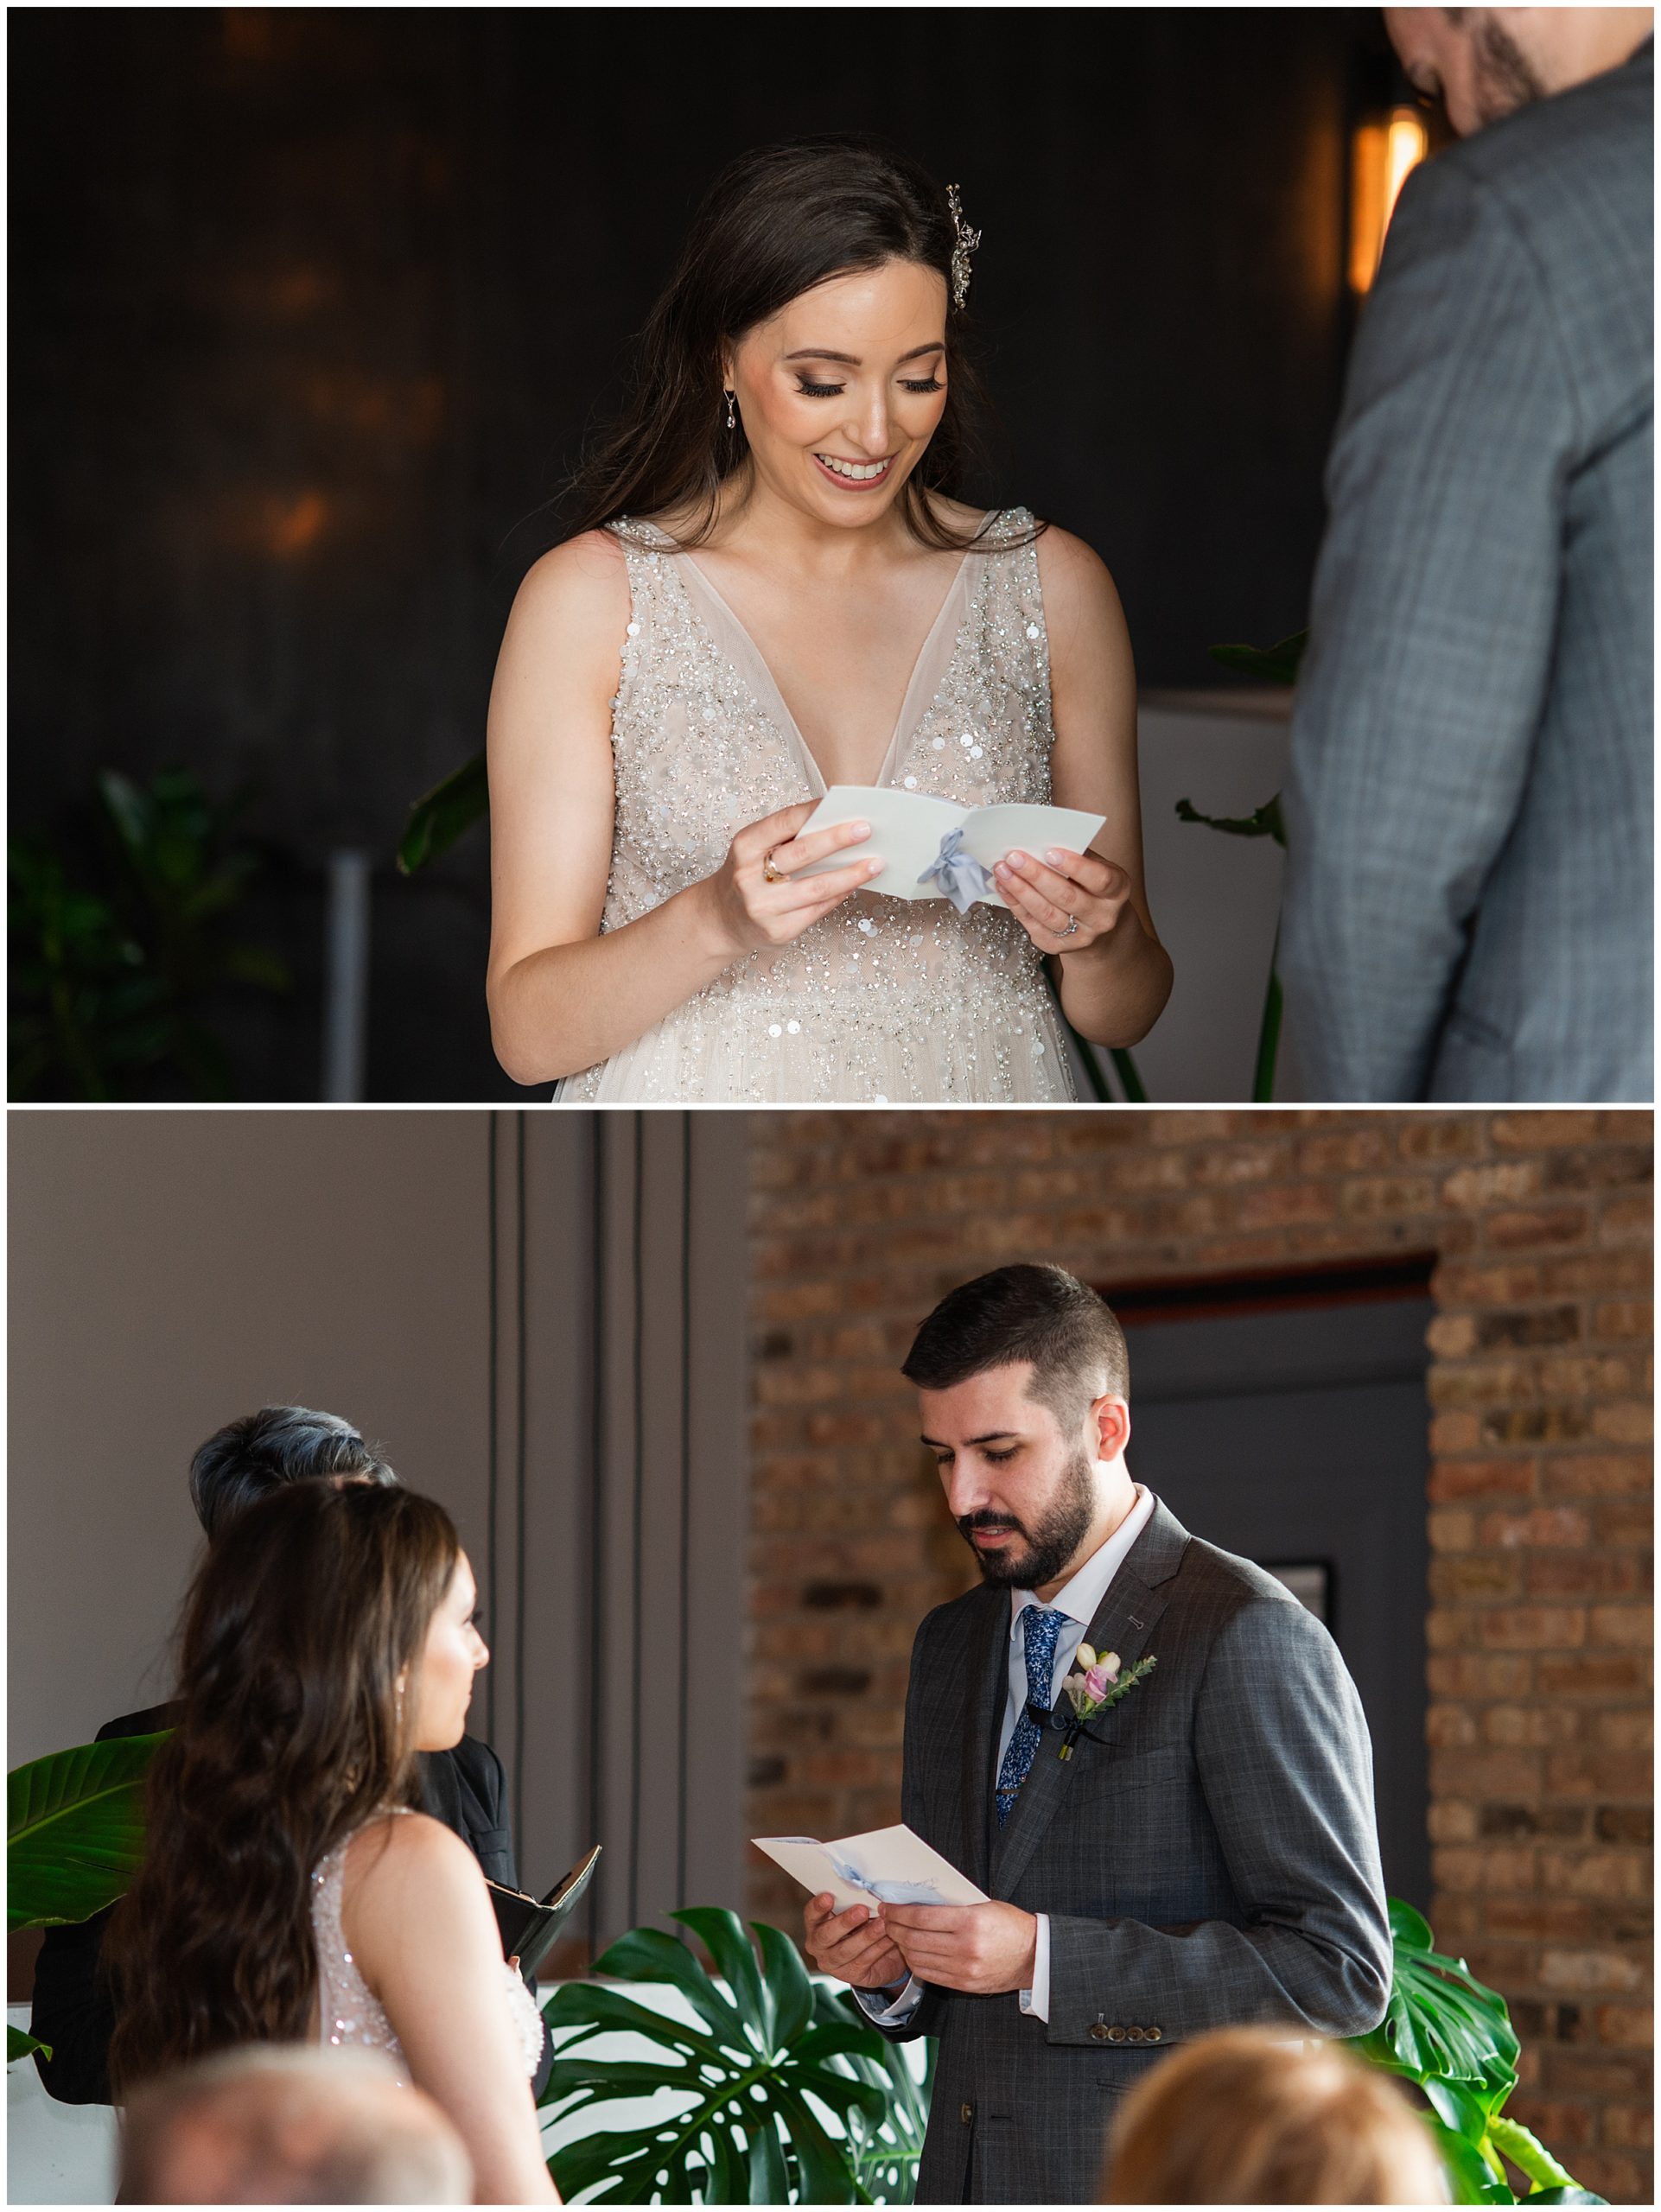 reading vows at small wedding